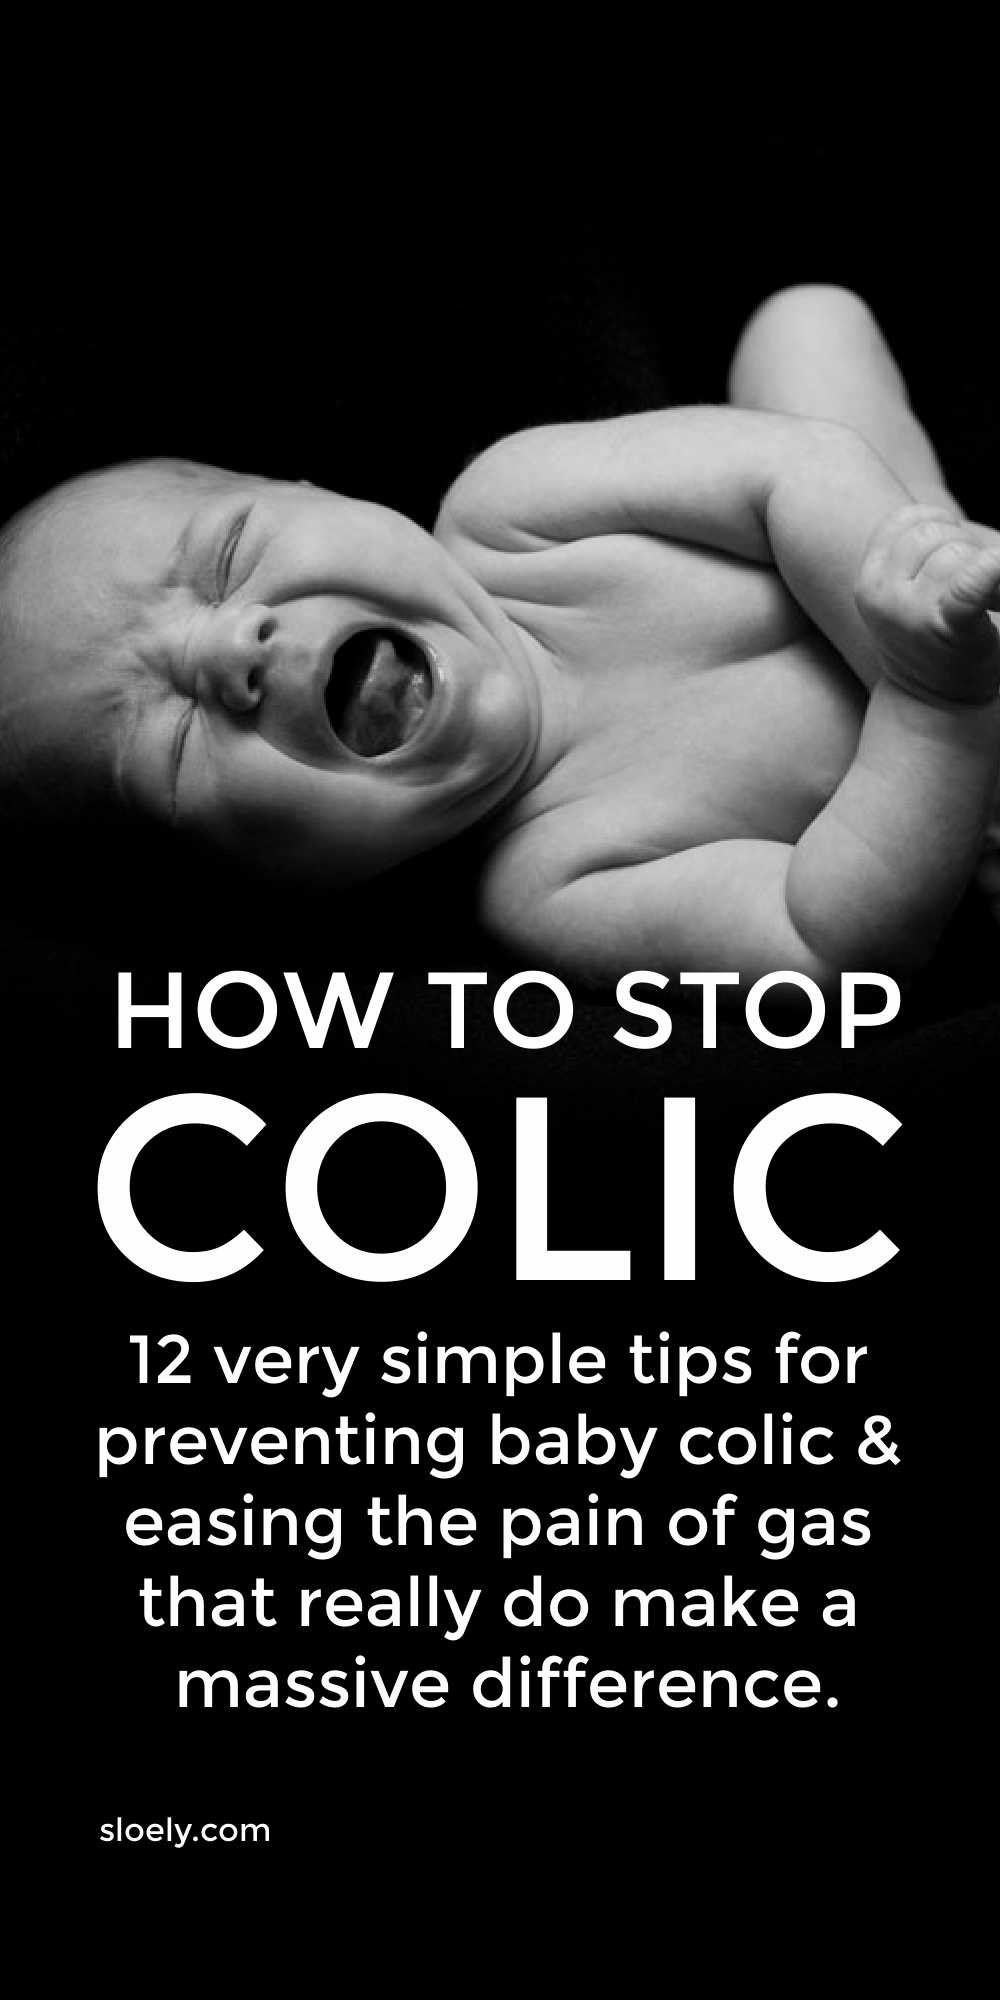 How To Stop Colic